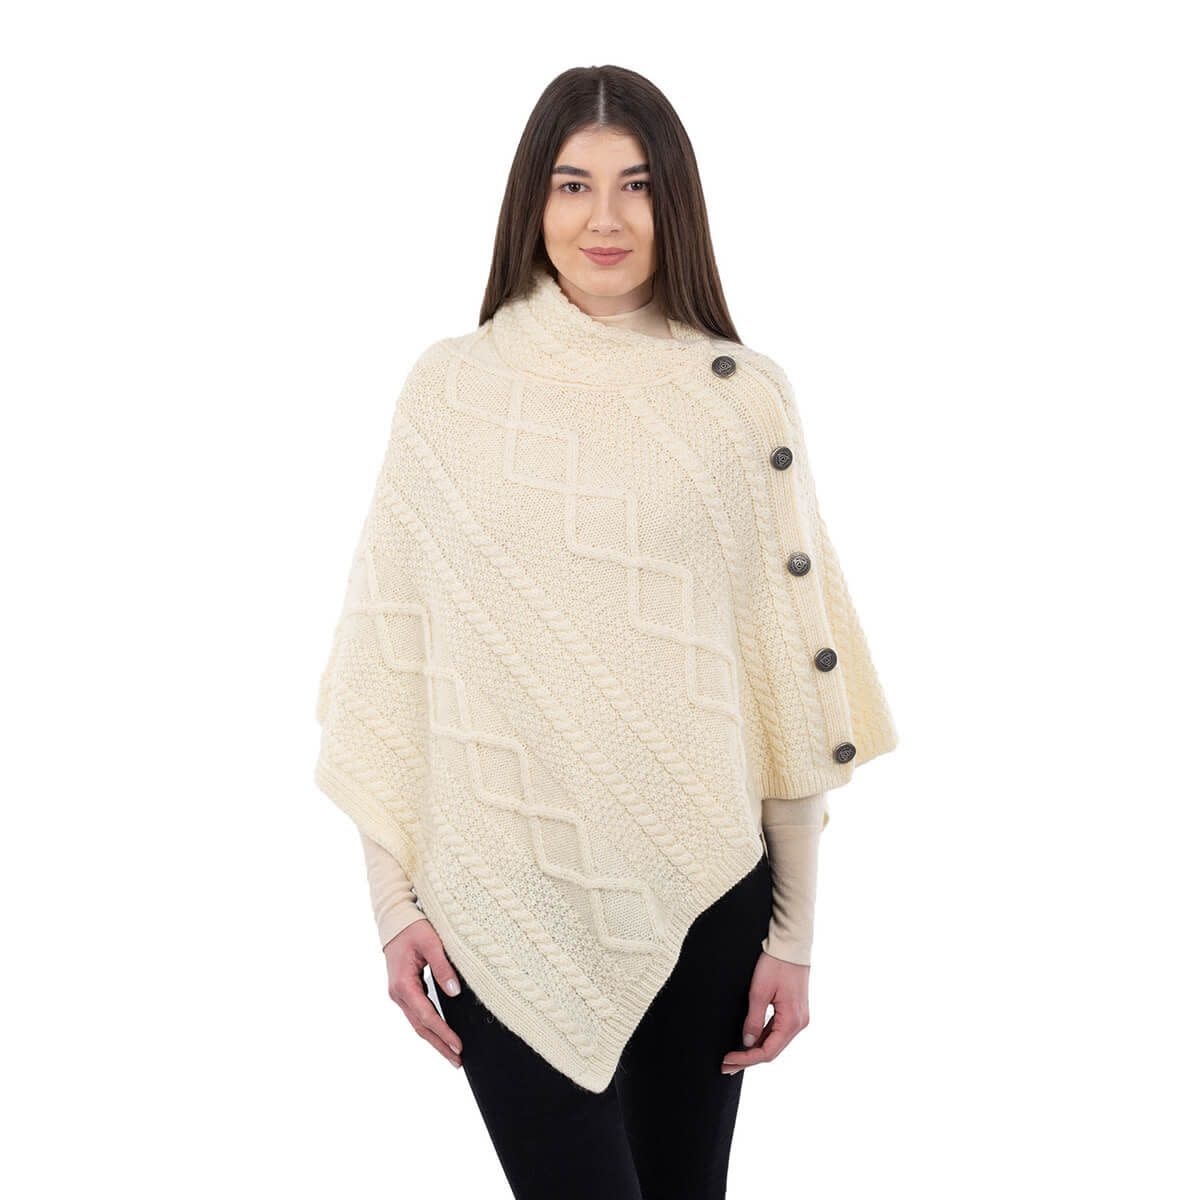 CAPES & RUANAS SAOL CABLE KNIT PONCHO w BUTTONS - Natural